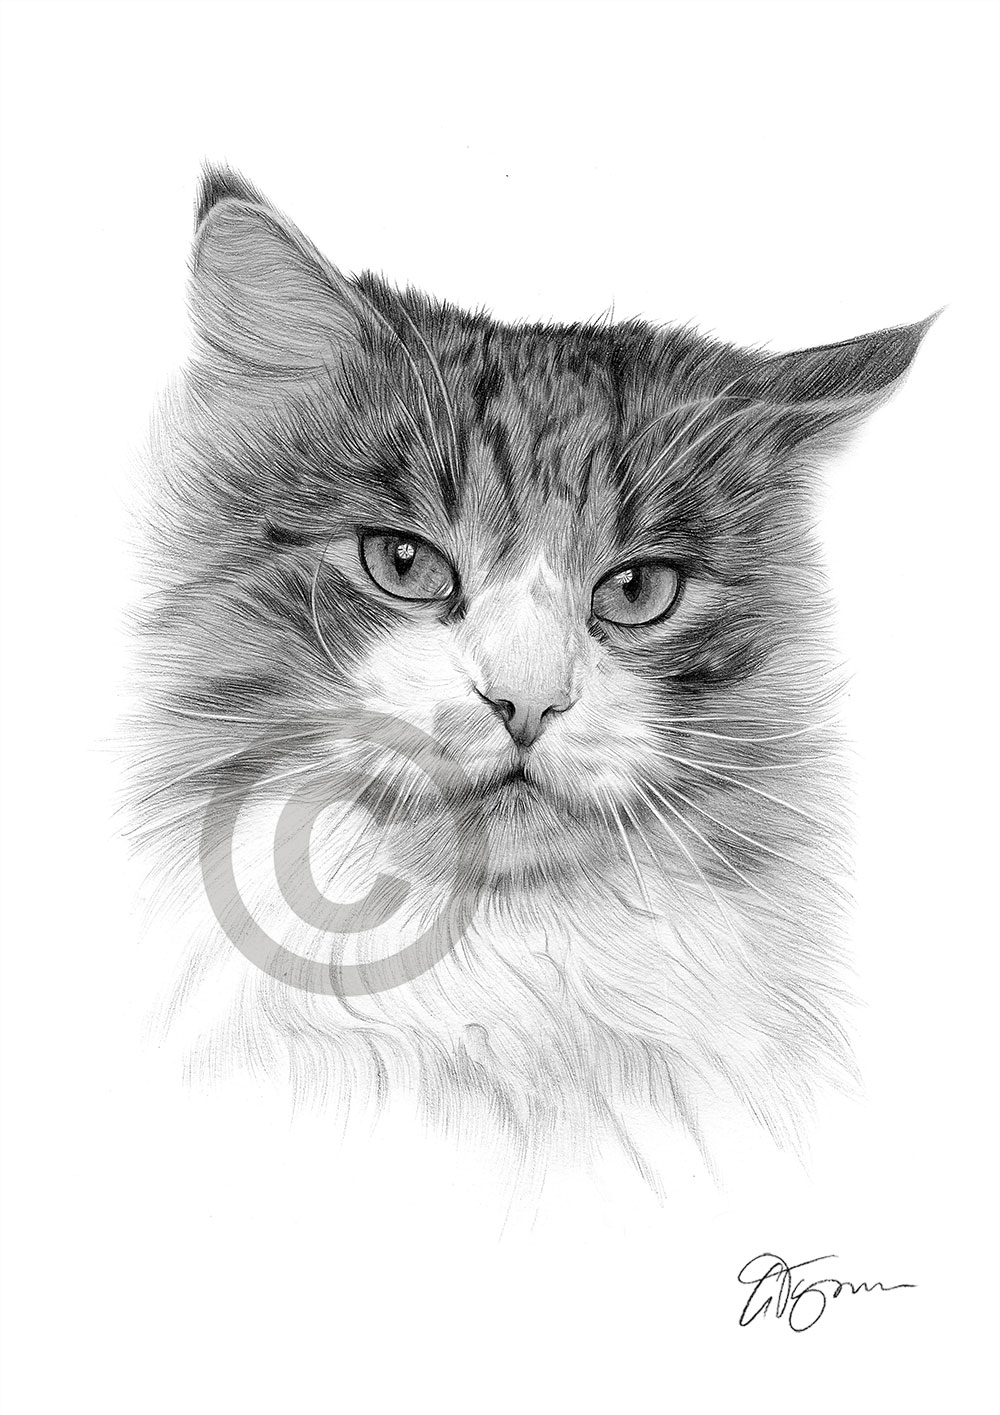 Pencil drawing of a domestic cat by UK artist Gary Tymon